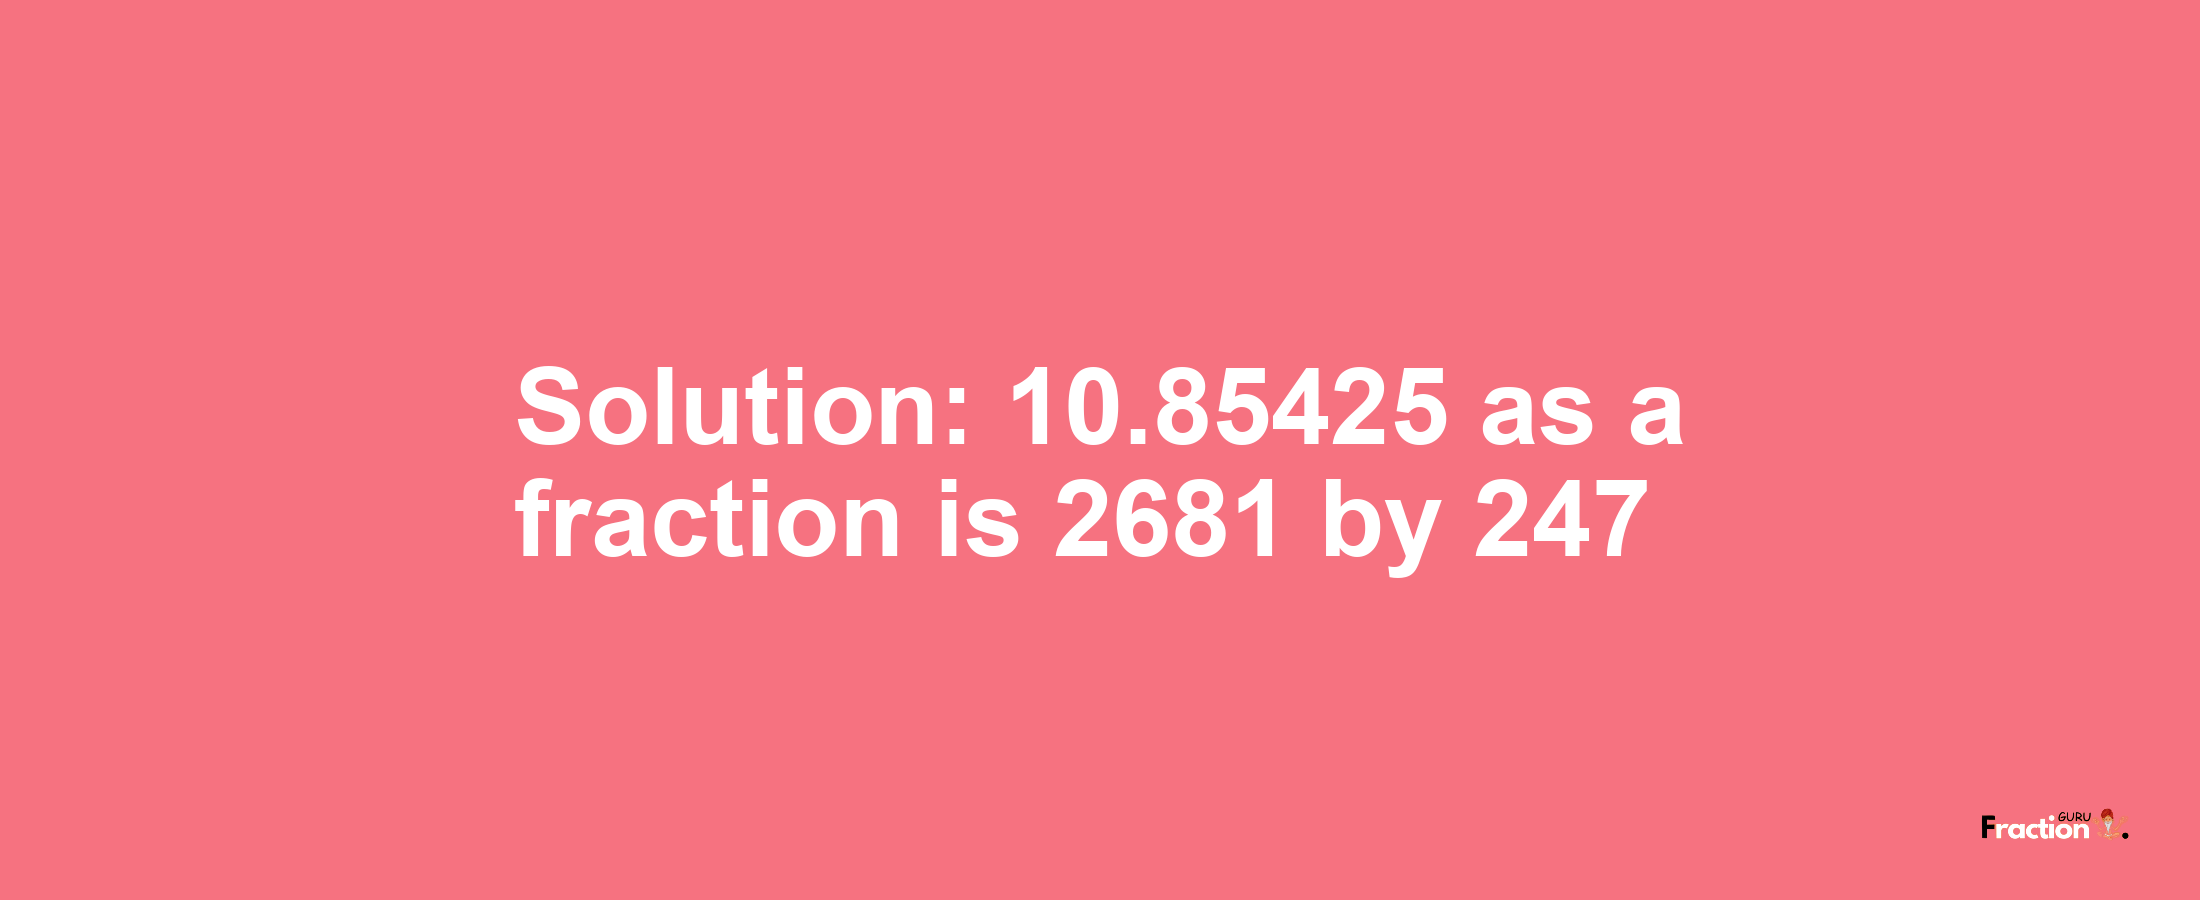 Solution:10.85425 as a fraction is 2681/247